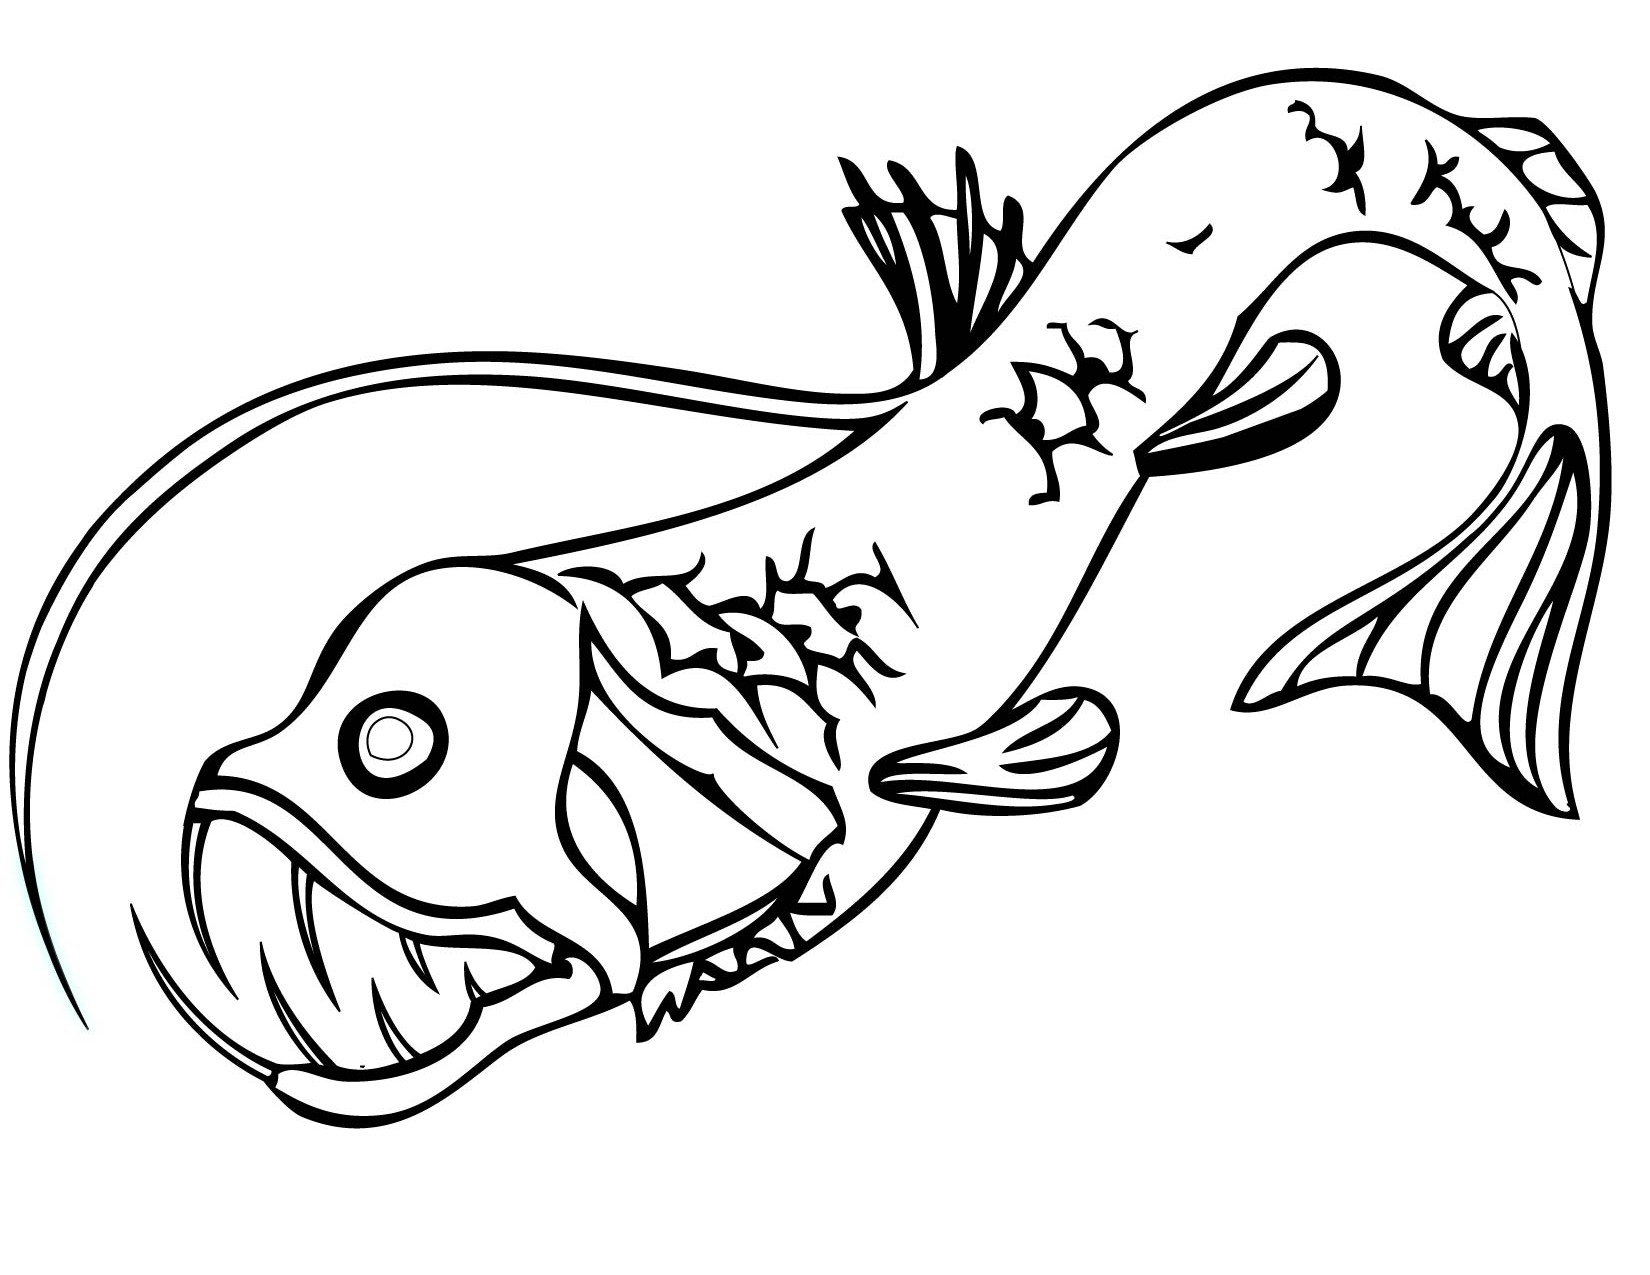 angler-fish-coloring-page-at-getcolorings-free-printable-colorings-pages-to-print-and-color